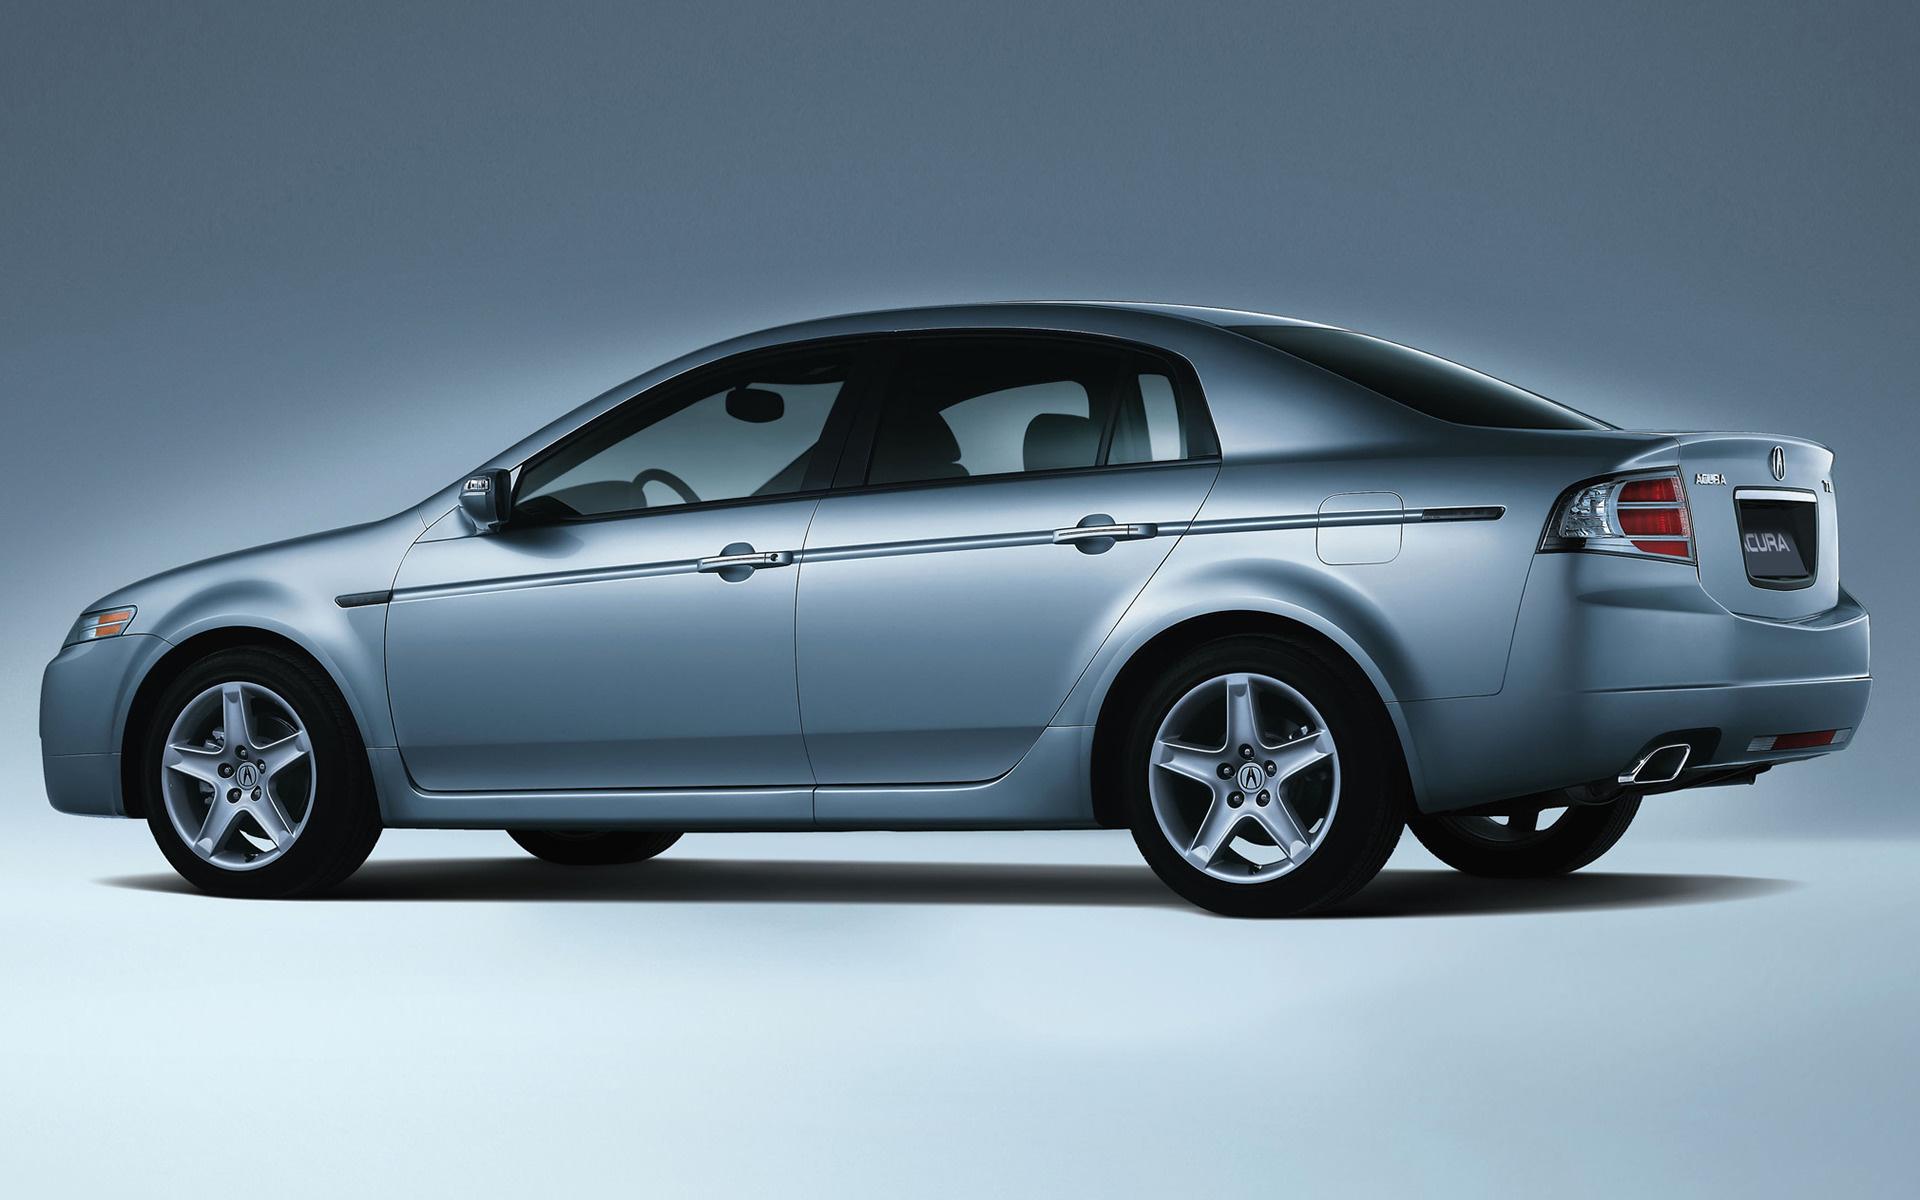 Acura TL (CN) and HD Image